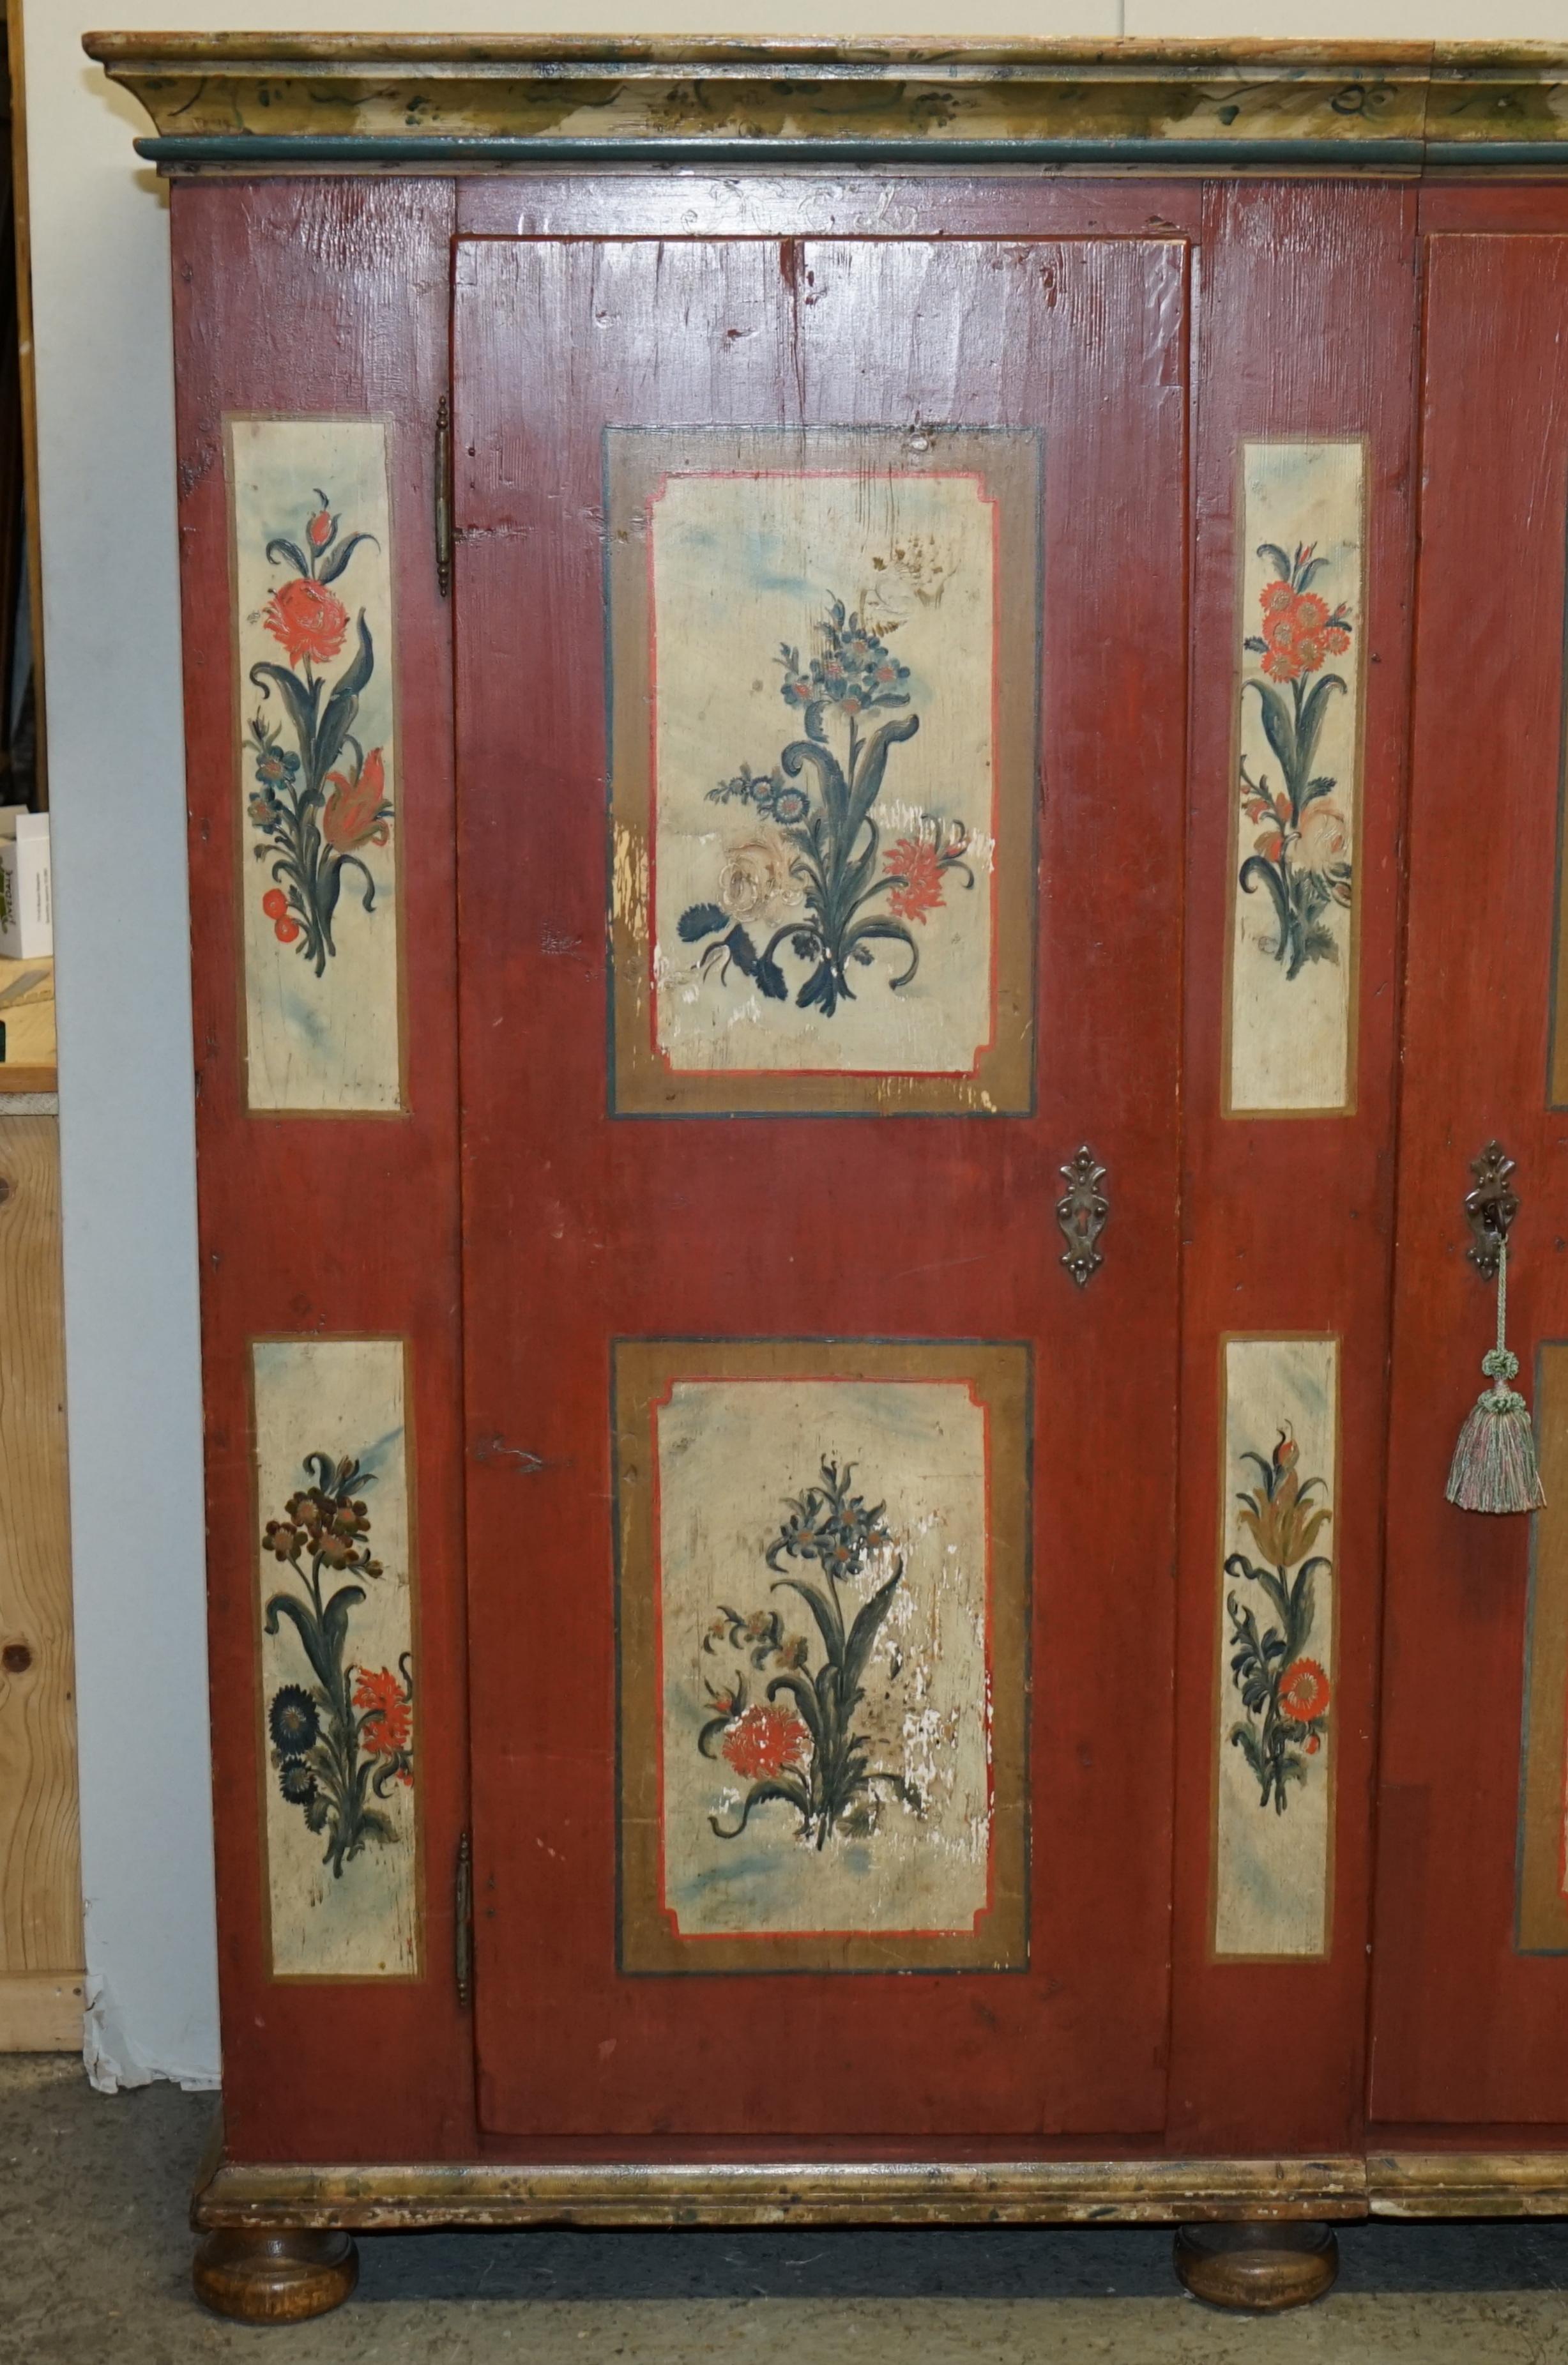 We are delighted to offer for sale this stunning, very large original 1812 Antique German Marriage wardrobe / housekeepers folded linen cupboard

I have recently purchased a very large collection of these original, antique painted wardrobes and